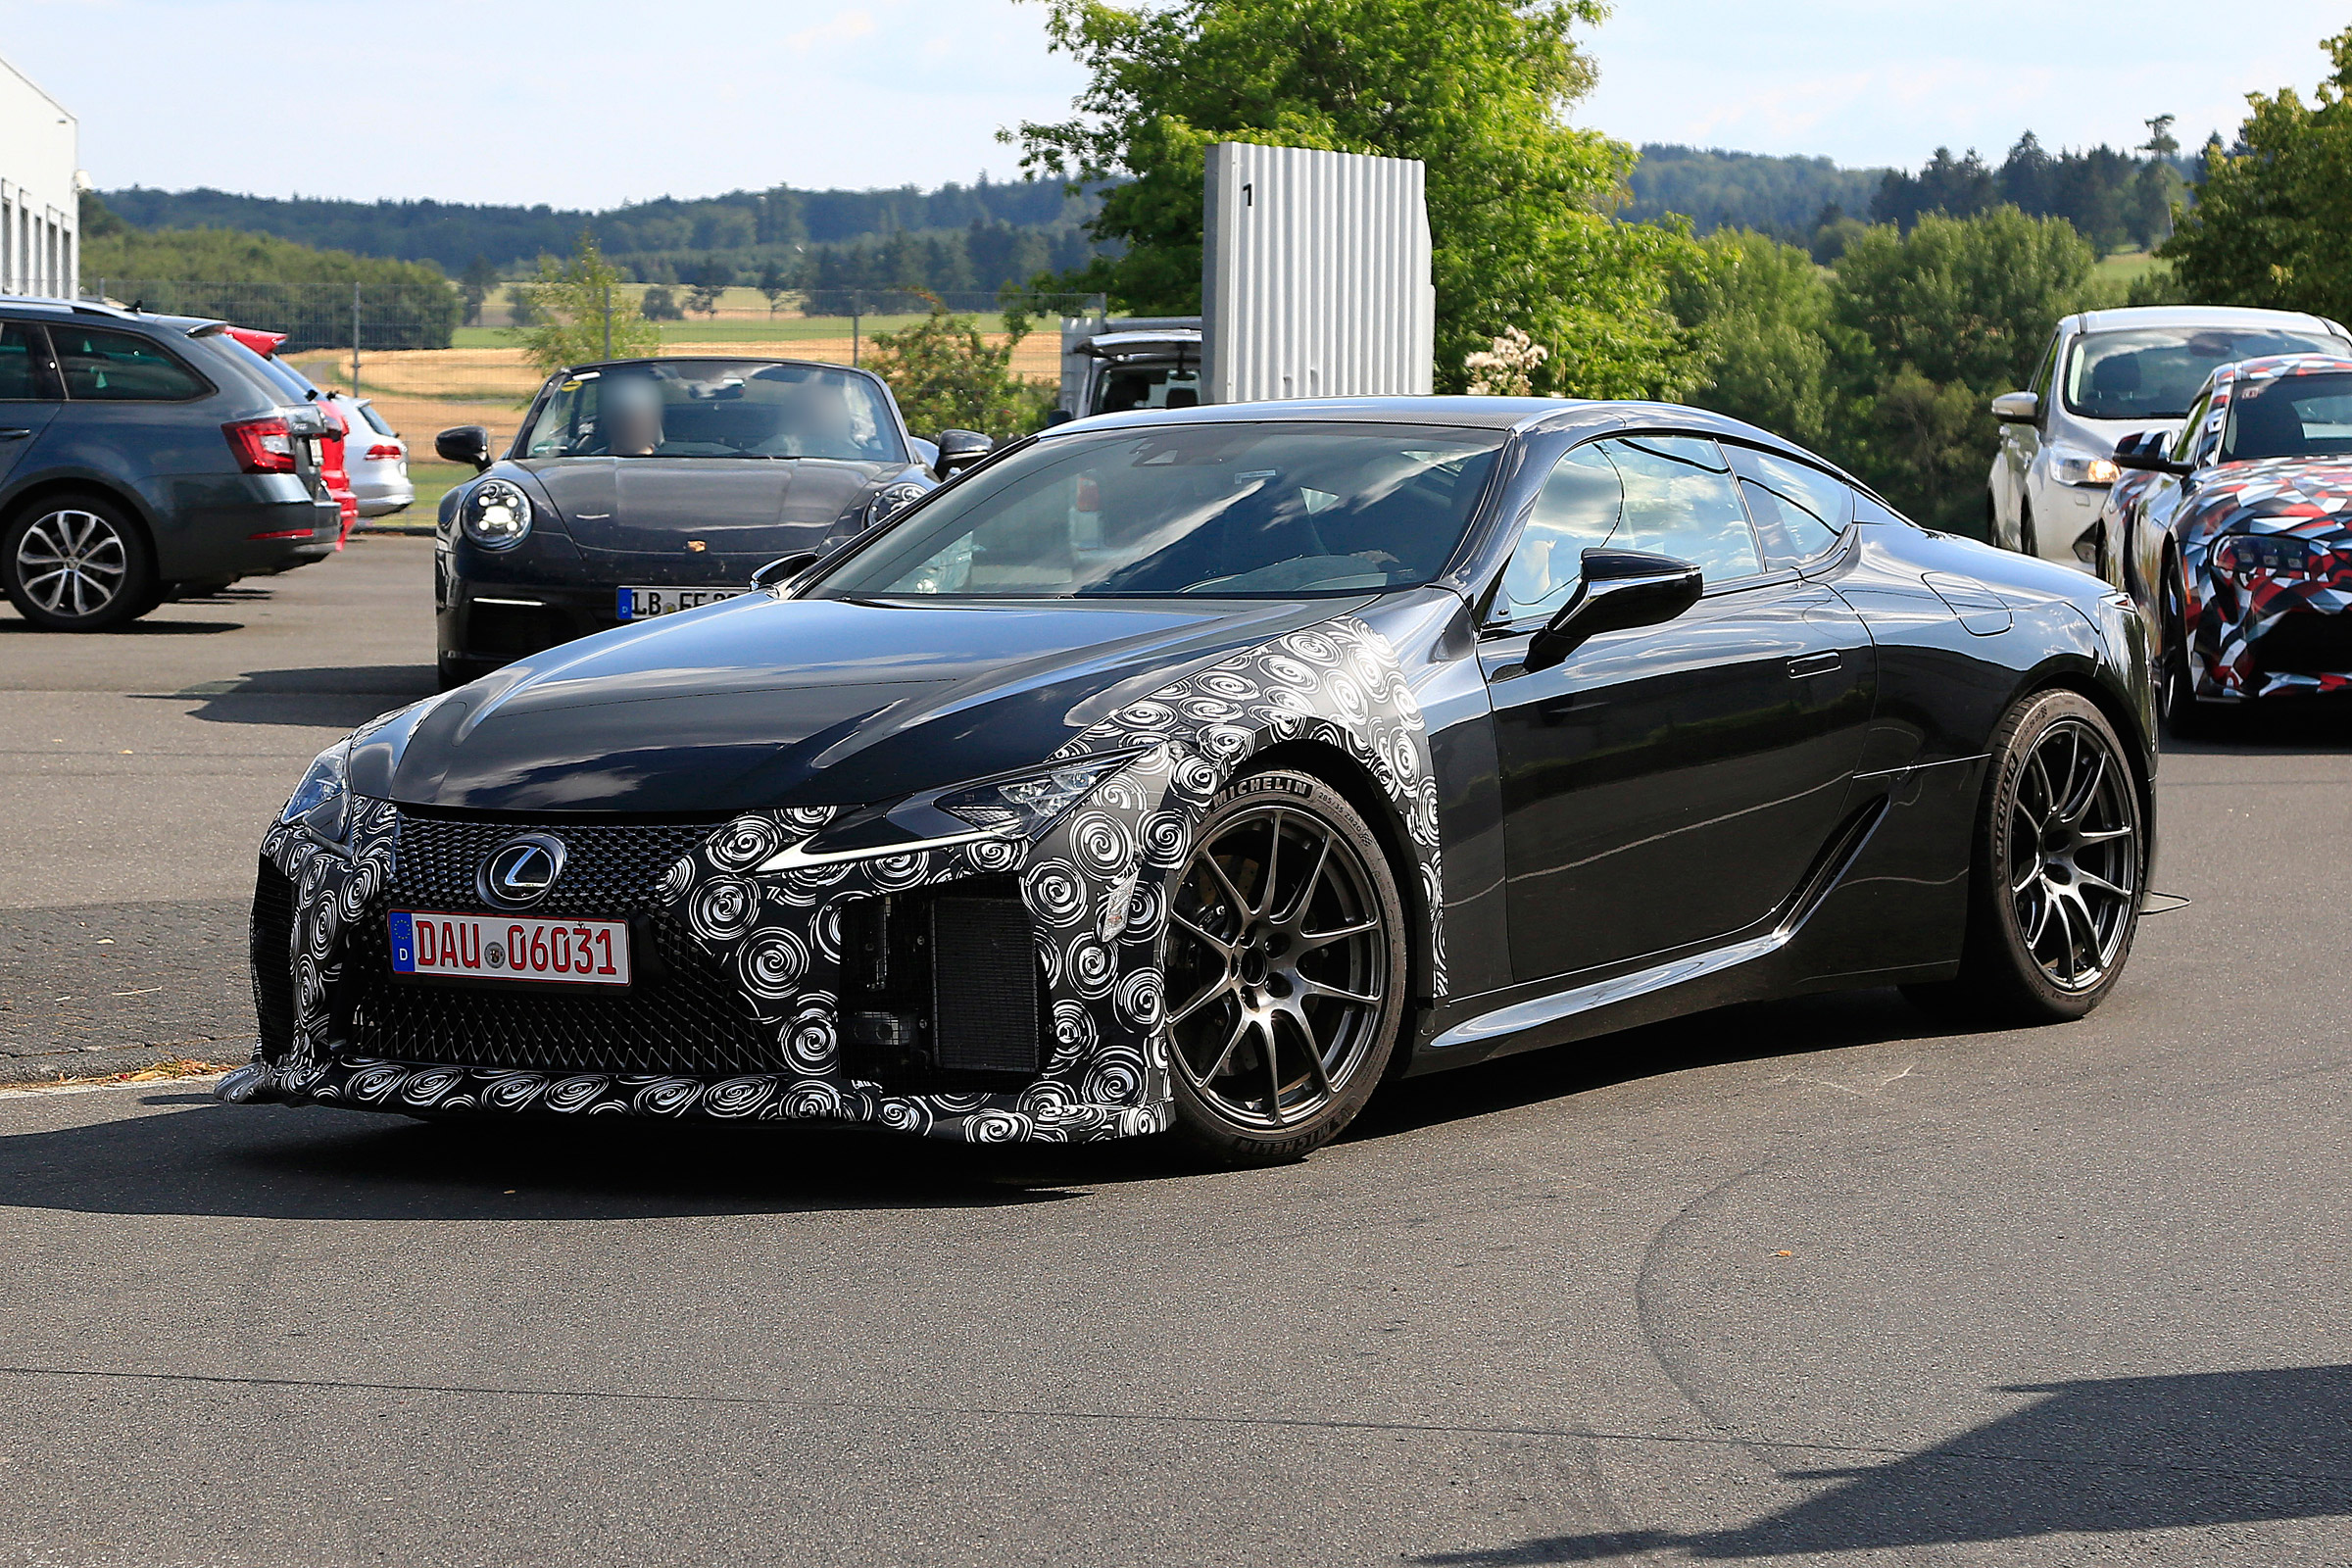 New Lexus LC F coupe caught on camera Auto Express